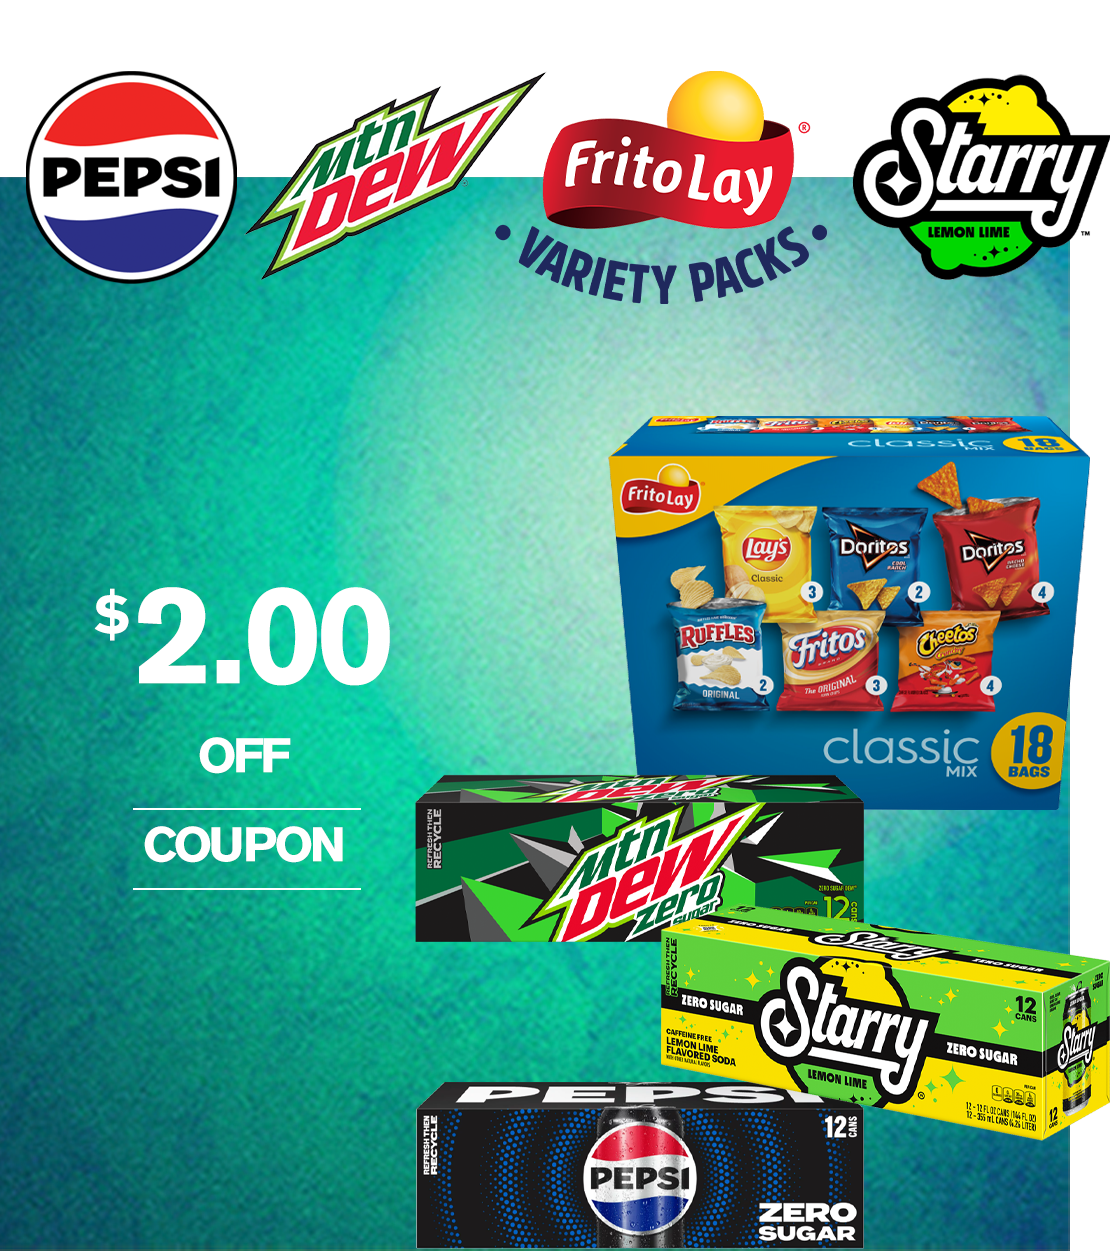 Save $2.00 off Frito Lay Variety Packs, MTN DEW, Starry, and Pepsi